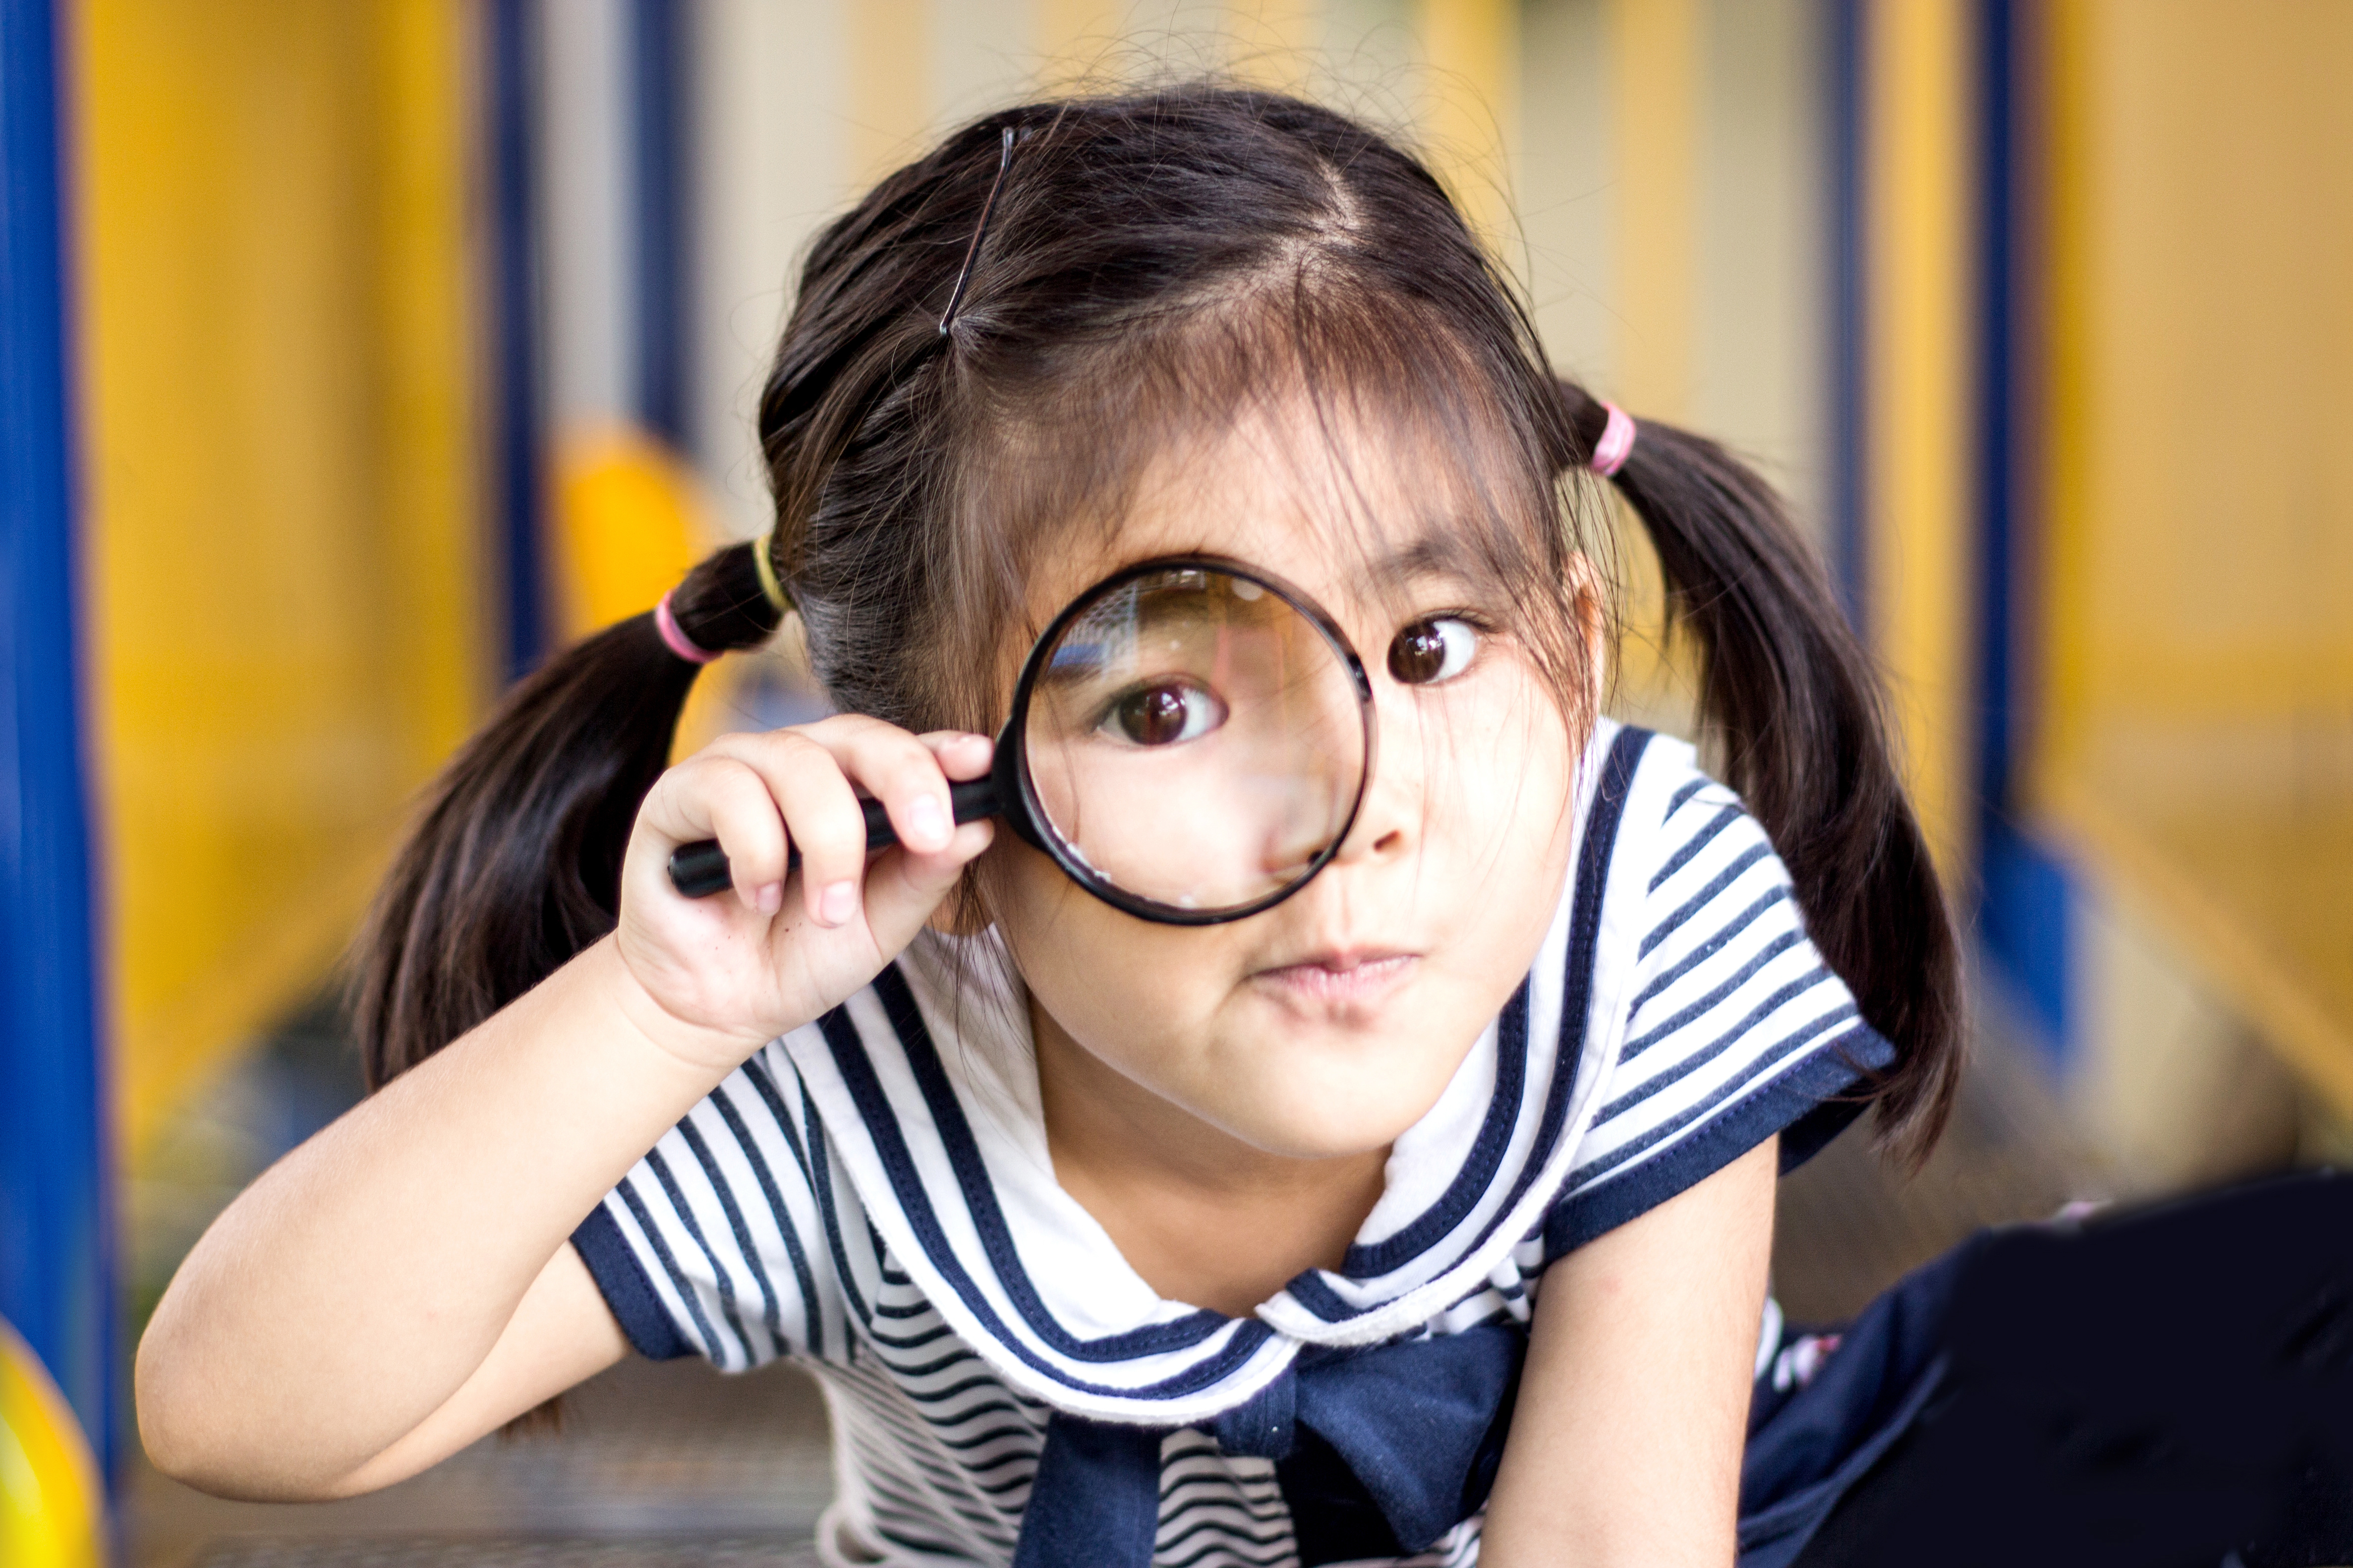 Young girl holds magnifying glass up to her eye